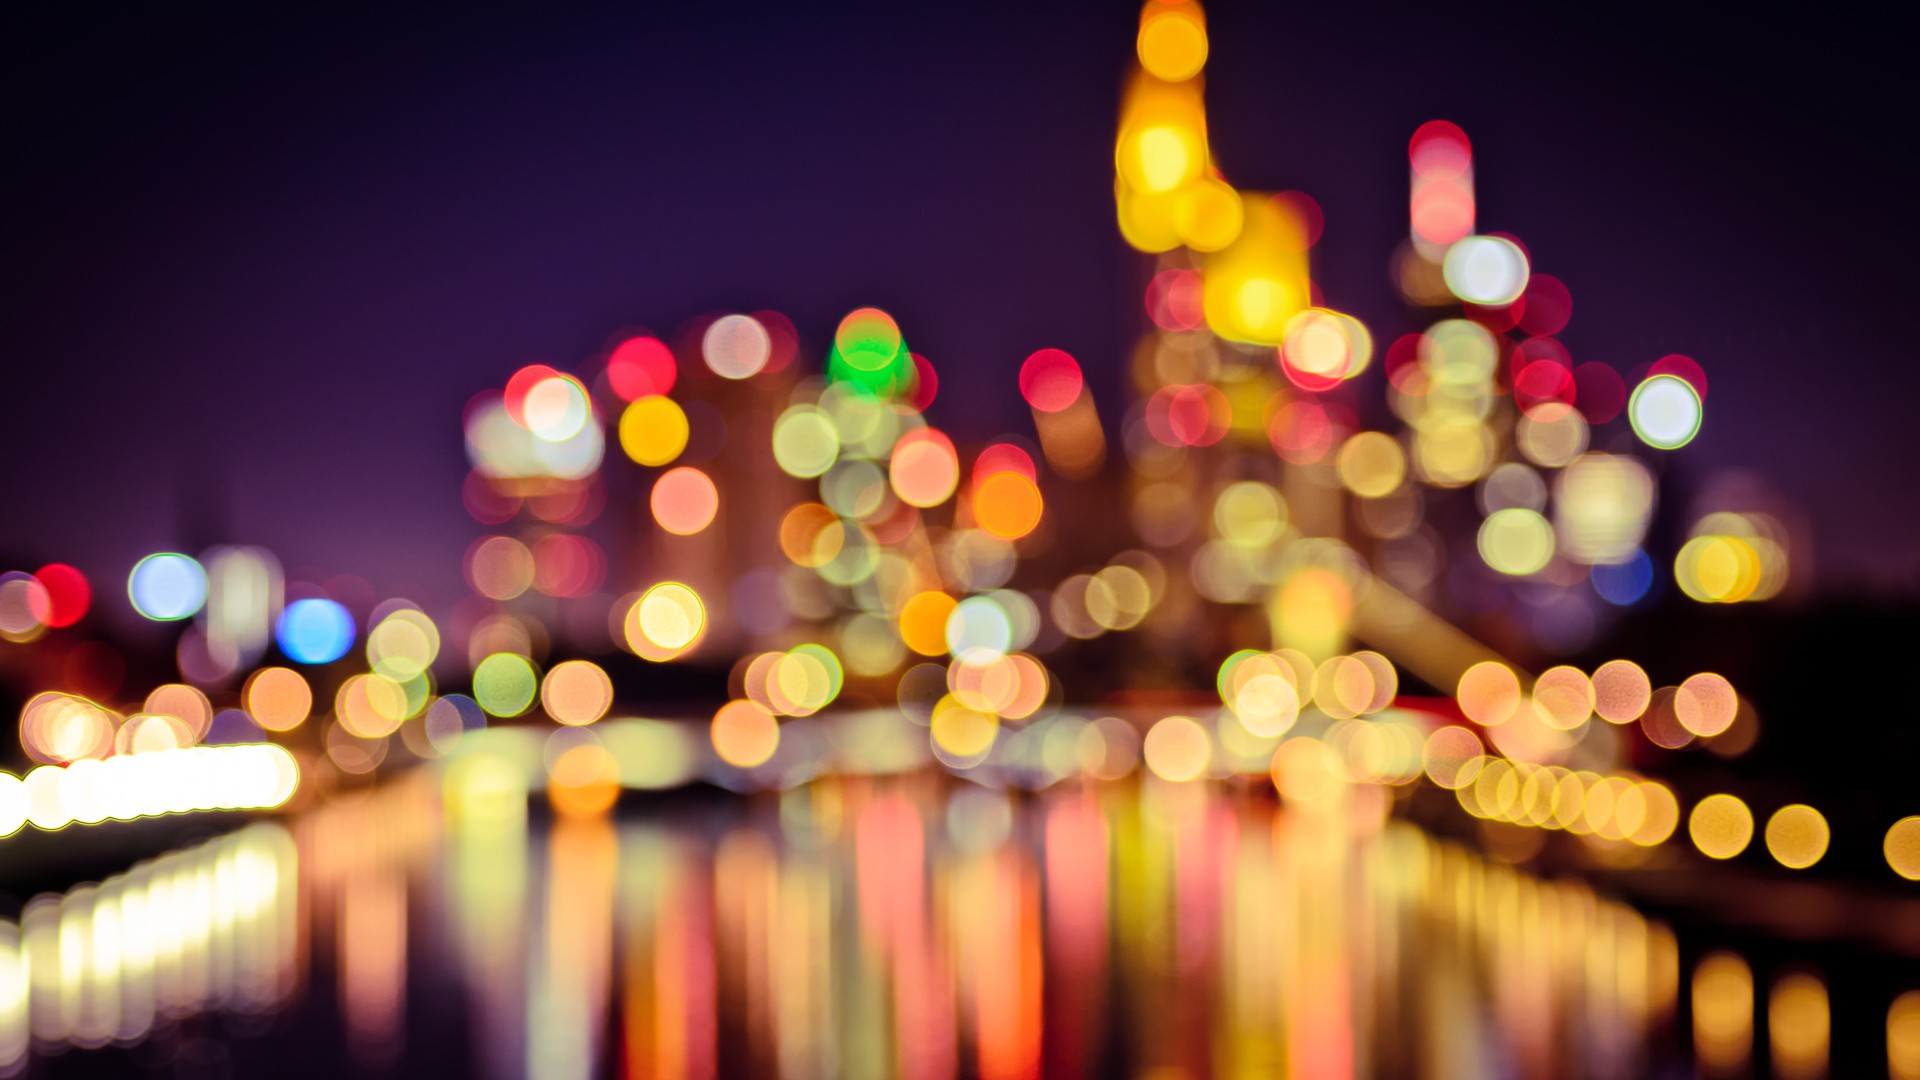 Night Bokeh Frankfurt Germany Cityscape Building Blurred Reflection Water Colorful Circle 1920x1080